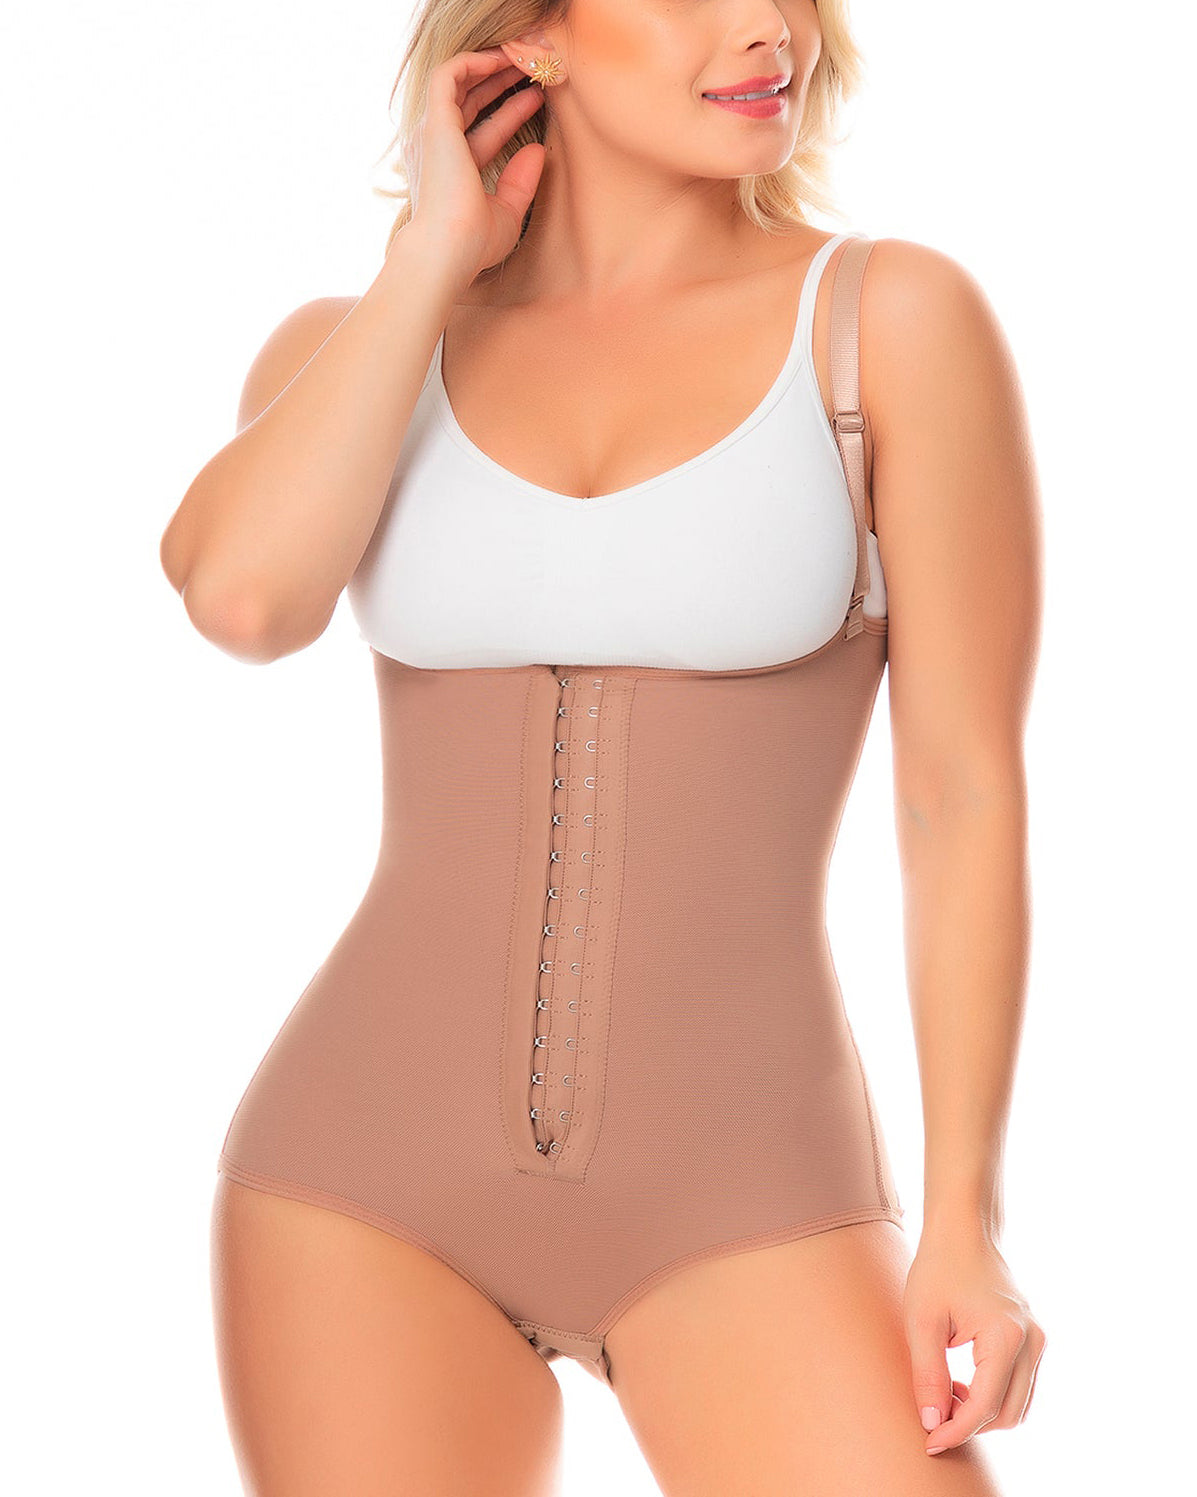 Fajas Colombianas Body Shaper Girdle With 2 Line Hooks, Covered Back, Free Breasts, Perineal Opening Crotch